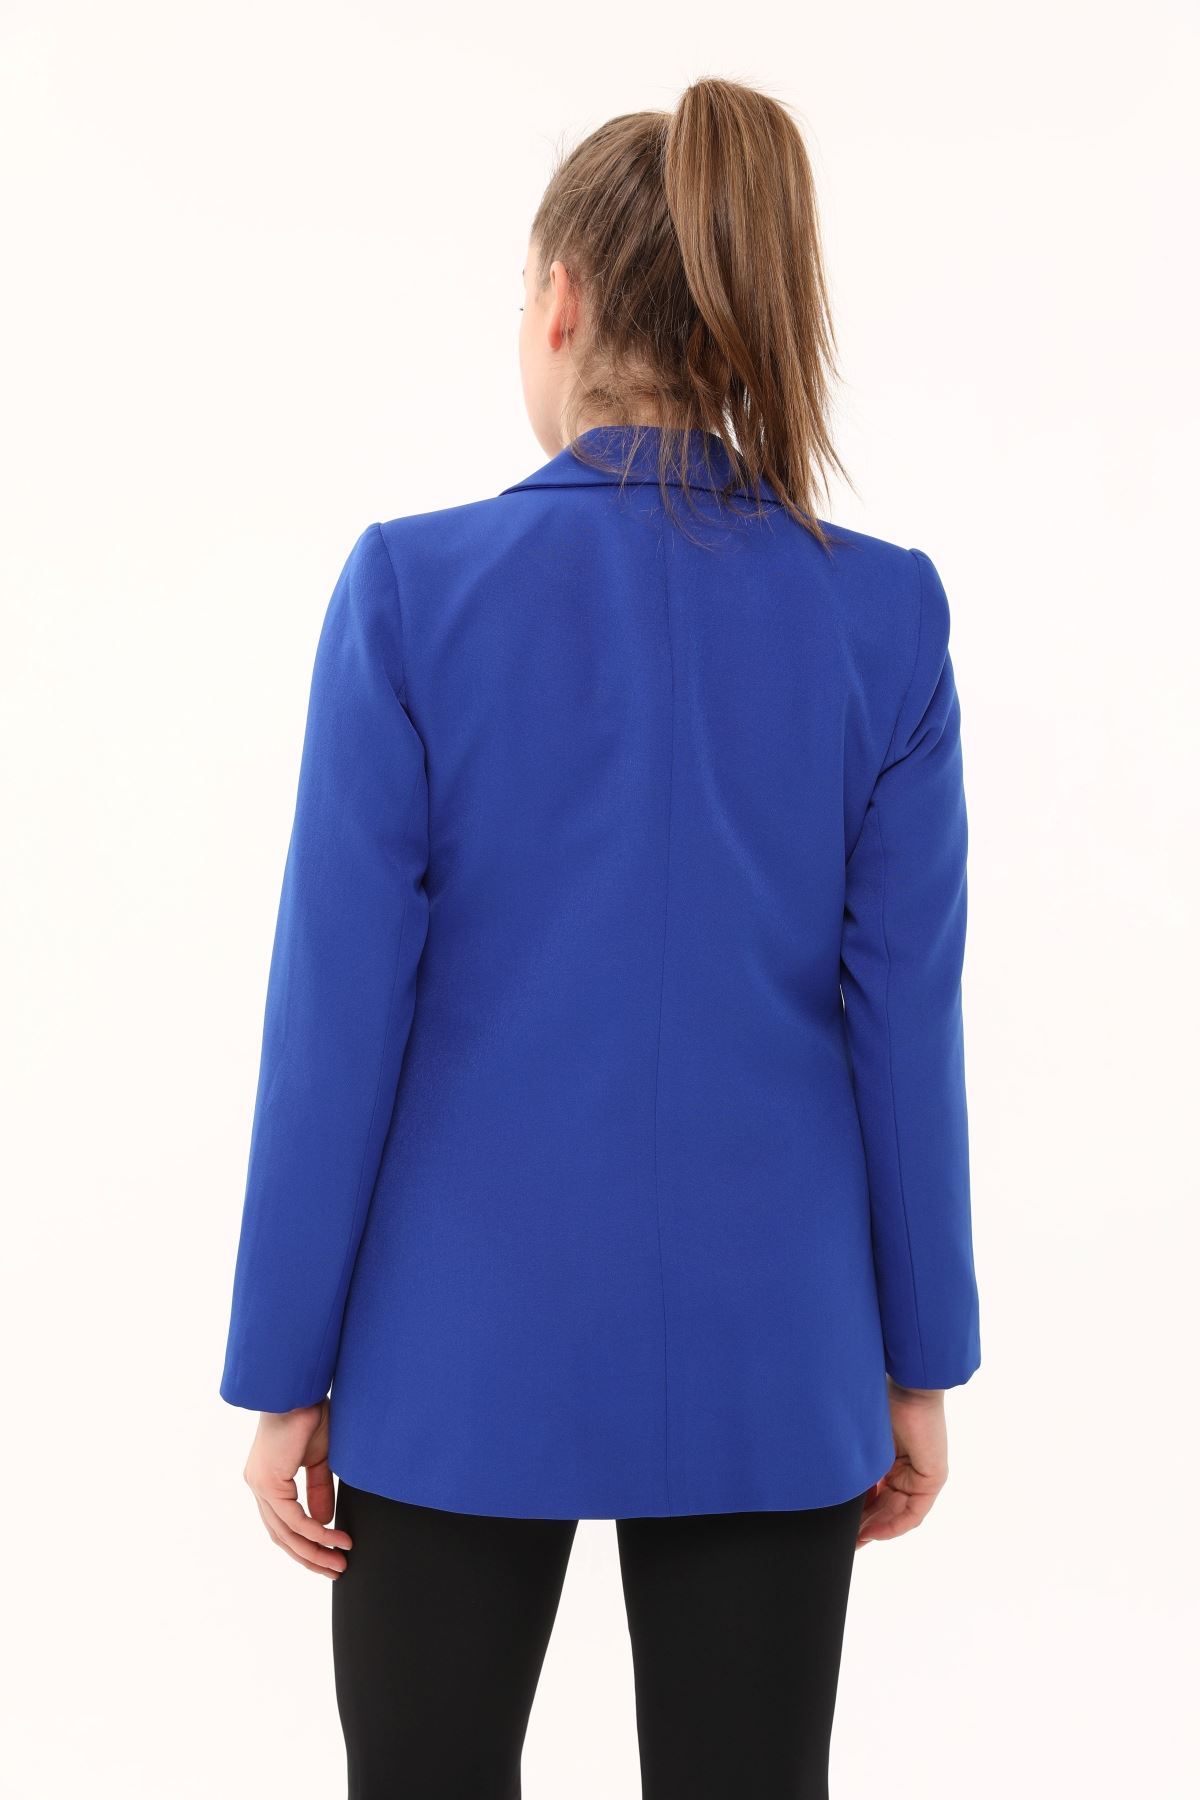 Plus Size Women's Jacket with Pocket Flap Front Button Fastening